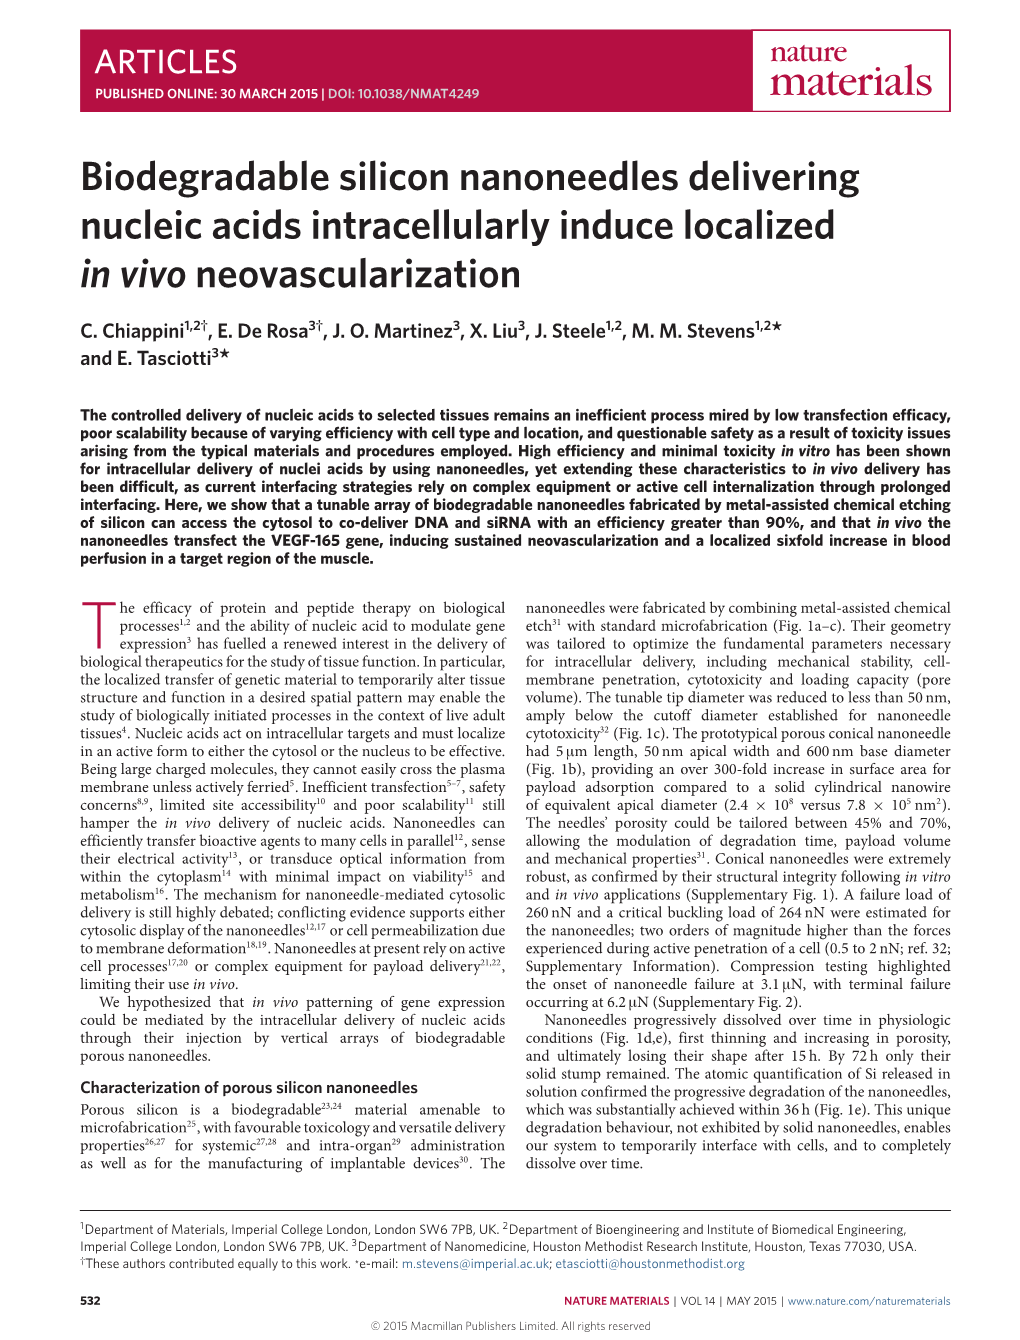 Biodegradable Silicon Nanoneedles Delivering Nucleic Acids Intracellularly Induce Localized in Vivo Neovascularization C